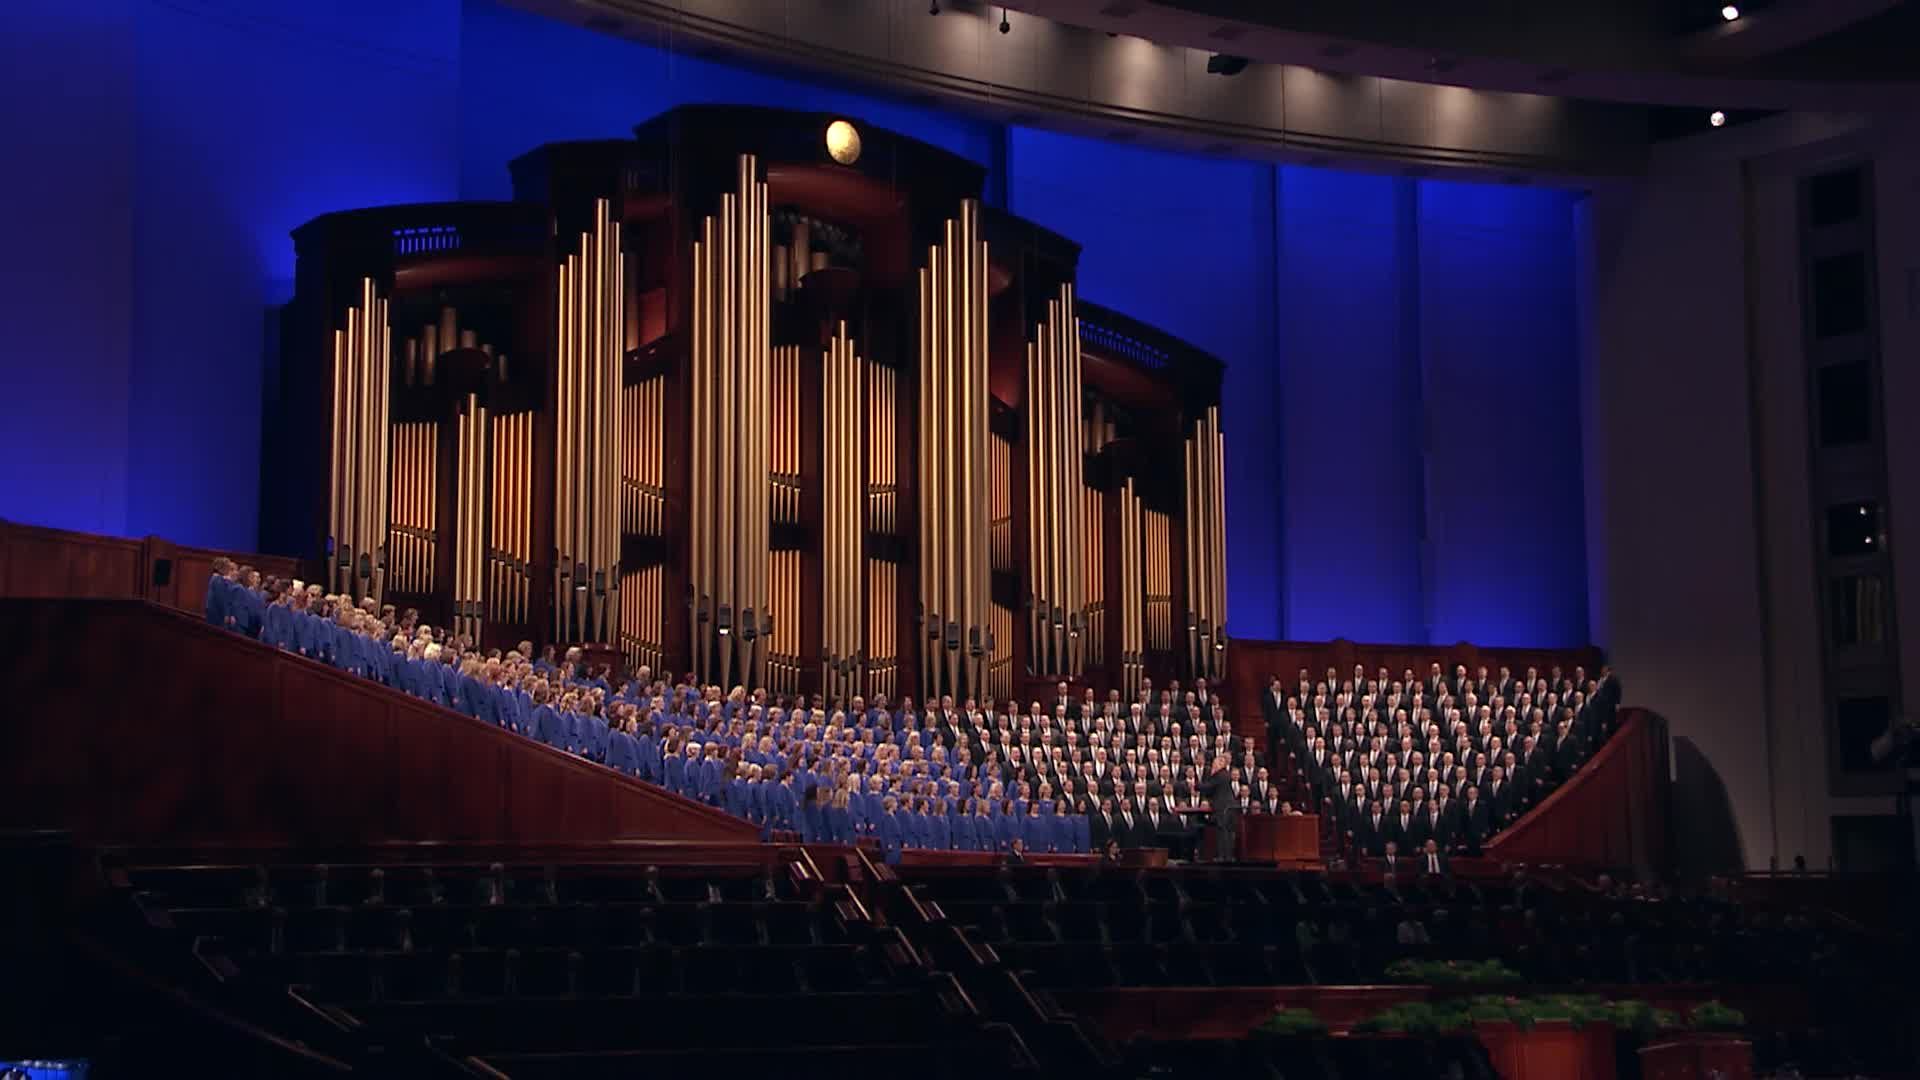 The Mormon Tabernacle Choir sings, "Come, Thou Fount of Every Blessing."